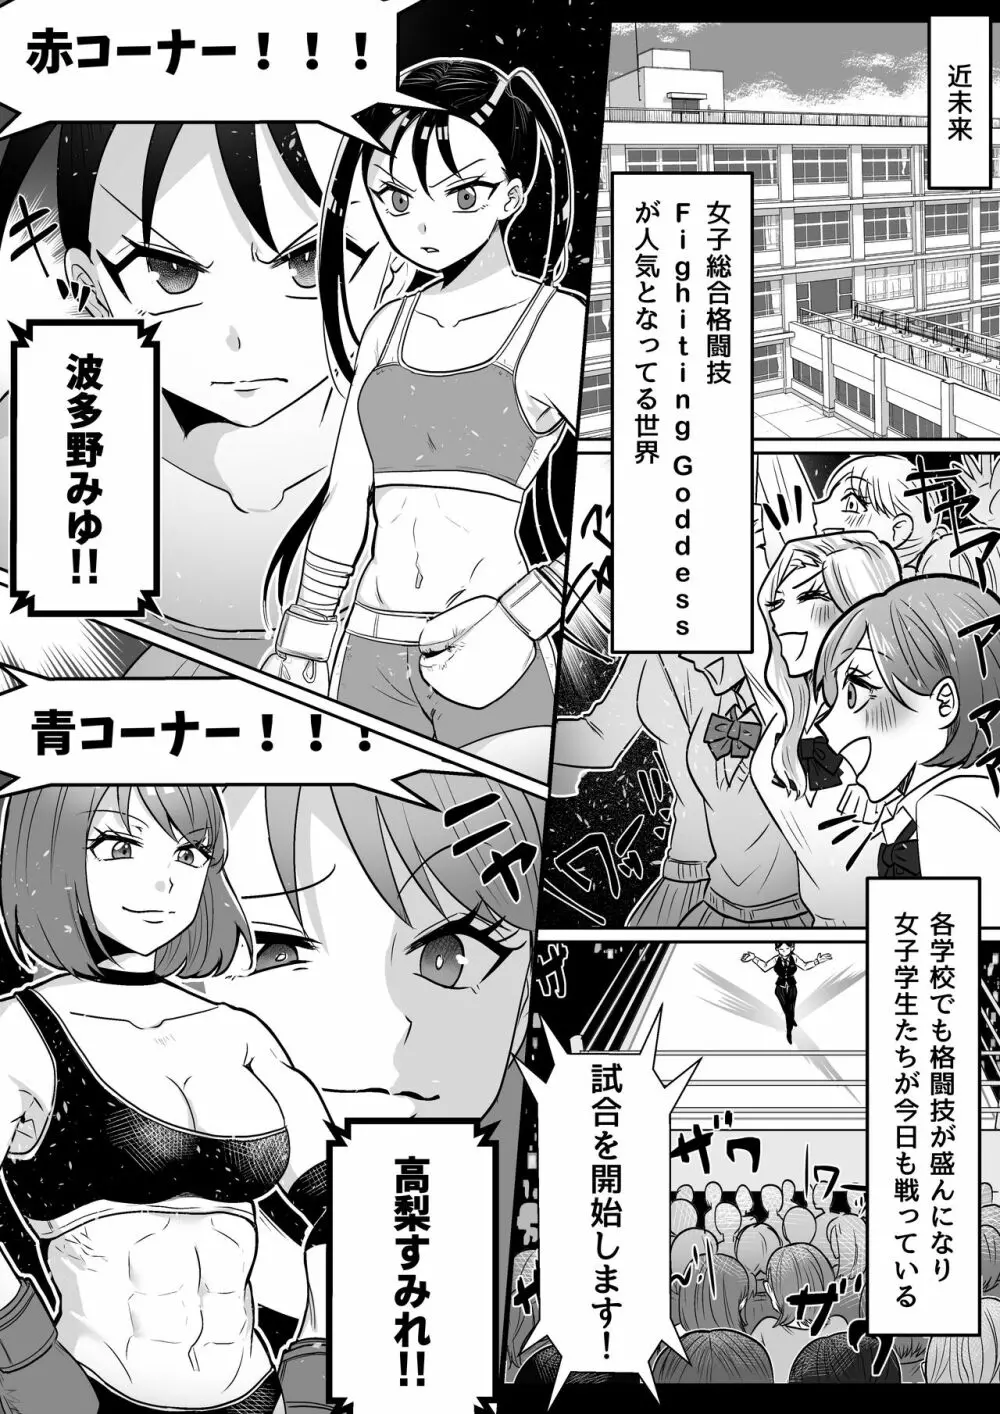 Fighting School 3 - page3